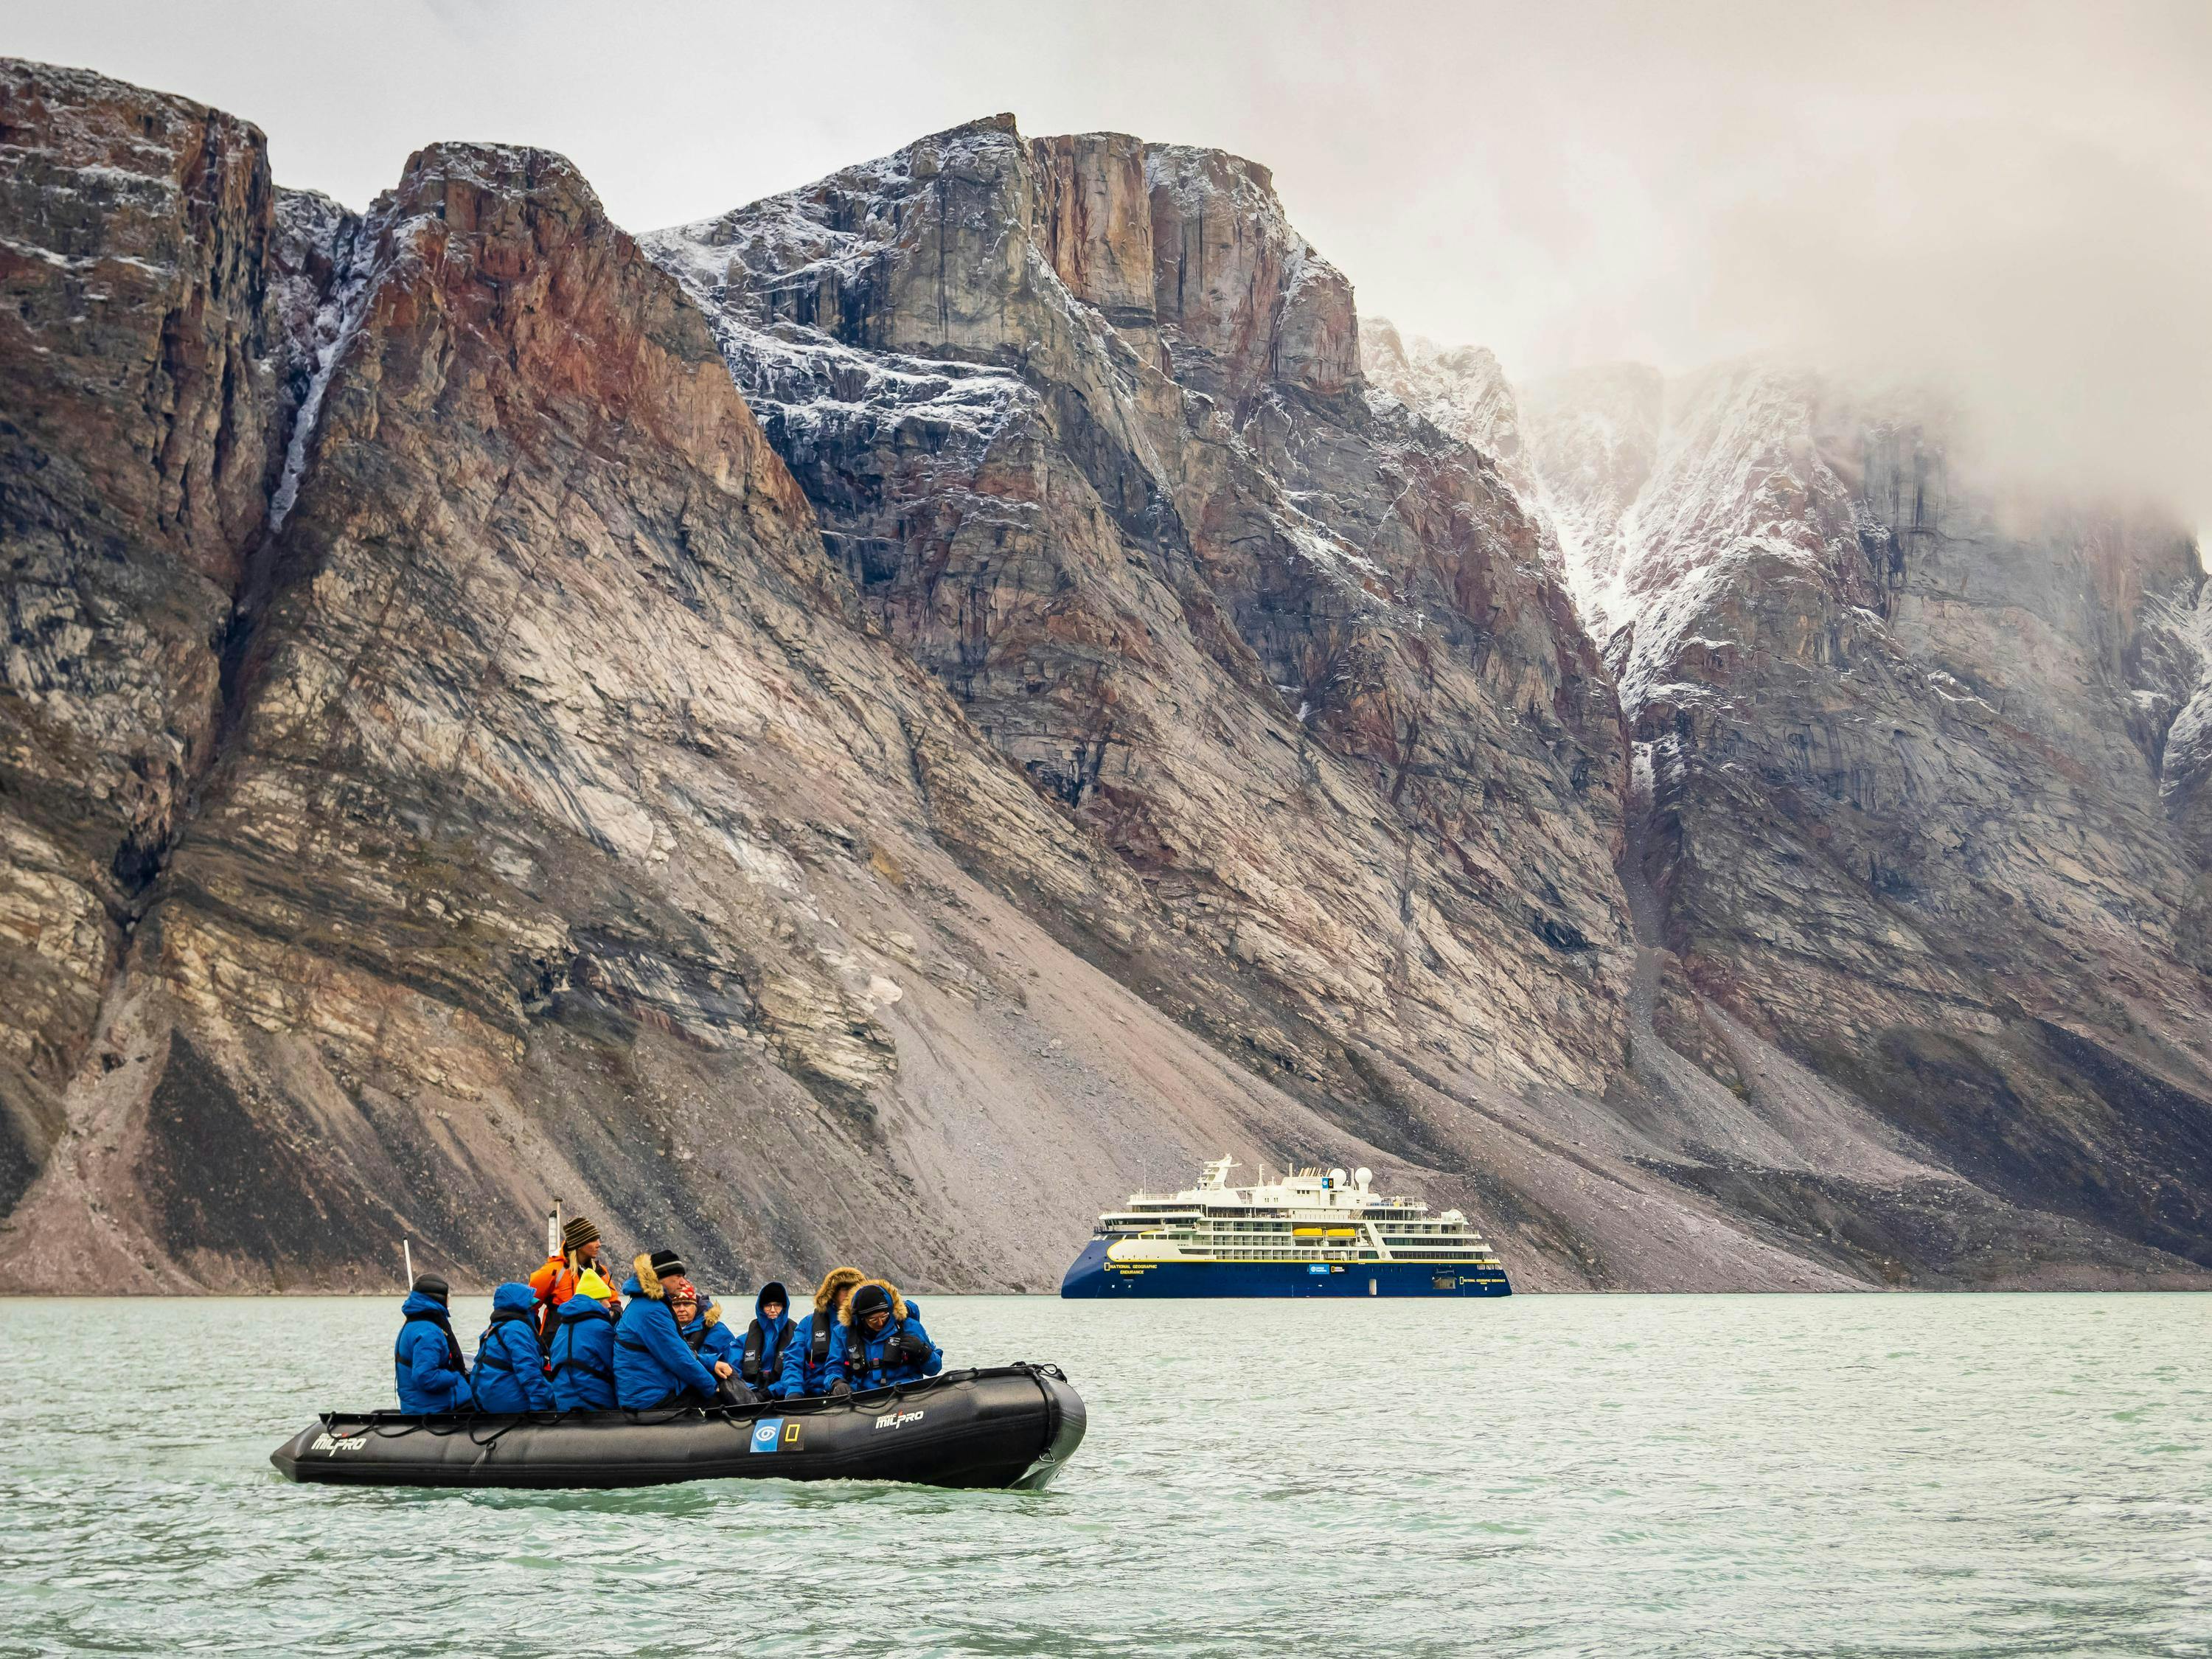 Guests explore by Zodiac from the ship National Geographic Endurance in Buchan Gulf, Baffin Island, Nunavut, Canada